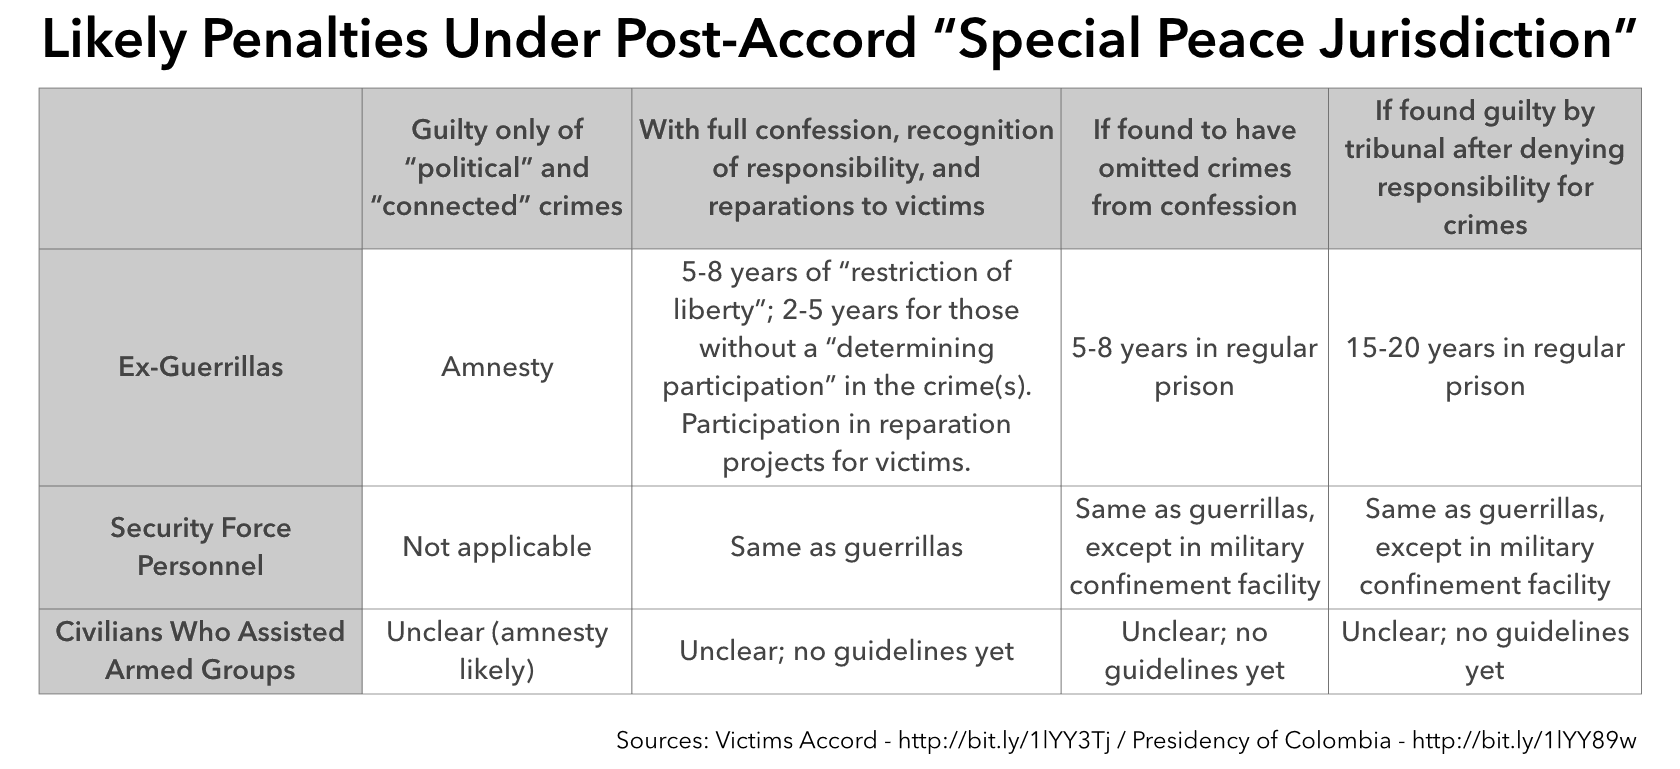 A table of likely penalties under the new peace jurisdiction